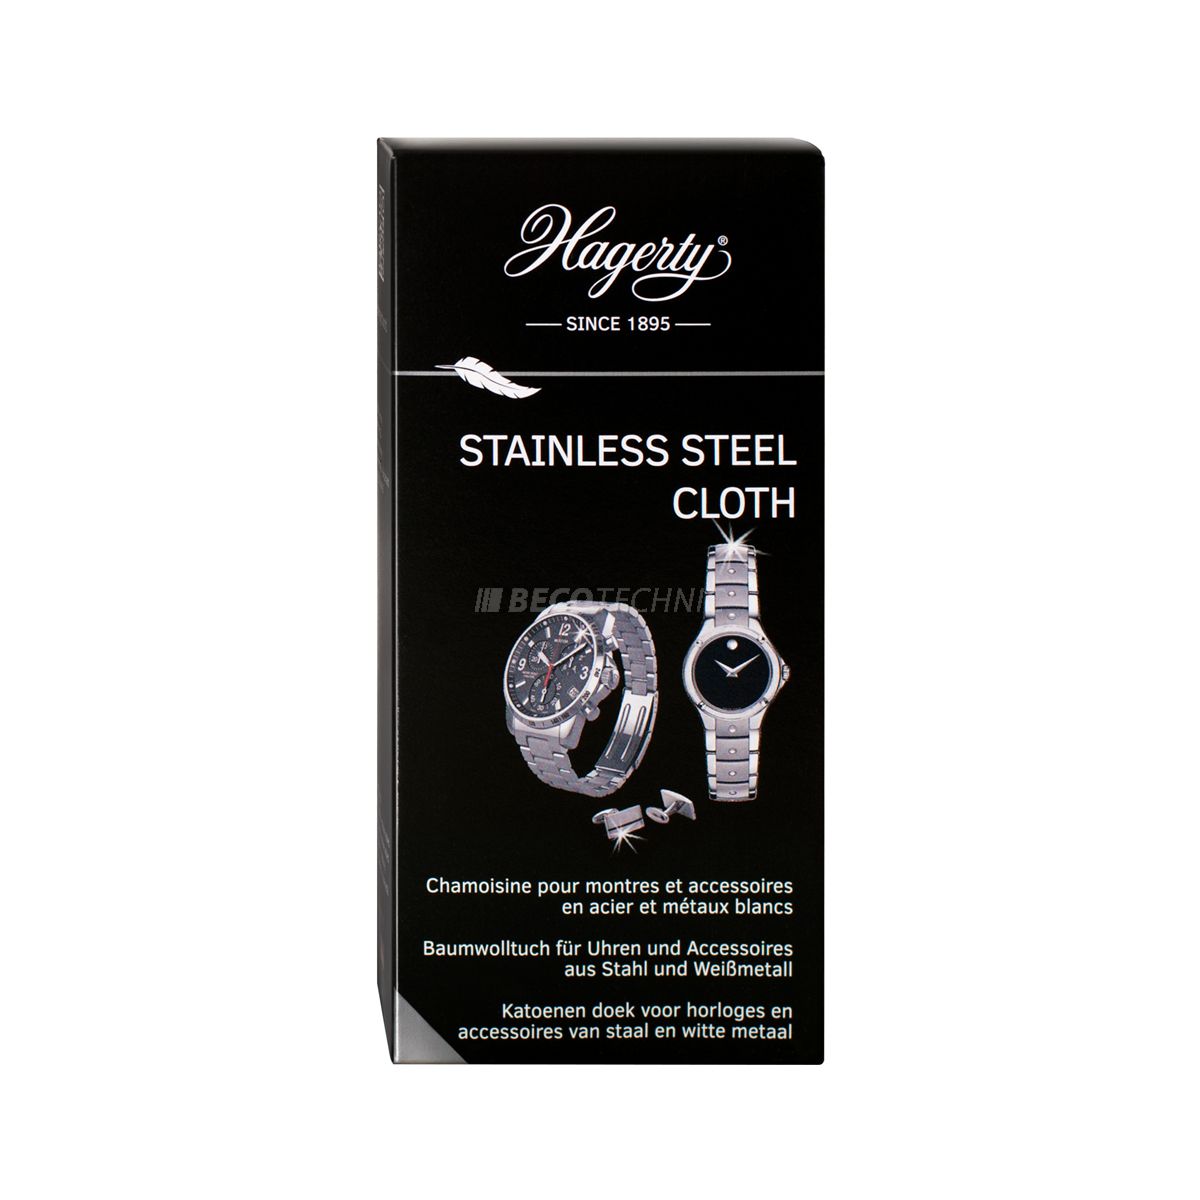 Hagerty Stainless Steel Cloth, care cloth for stainless steel, 36 x 30 cm